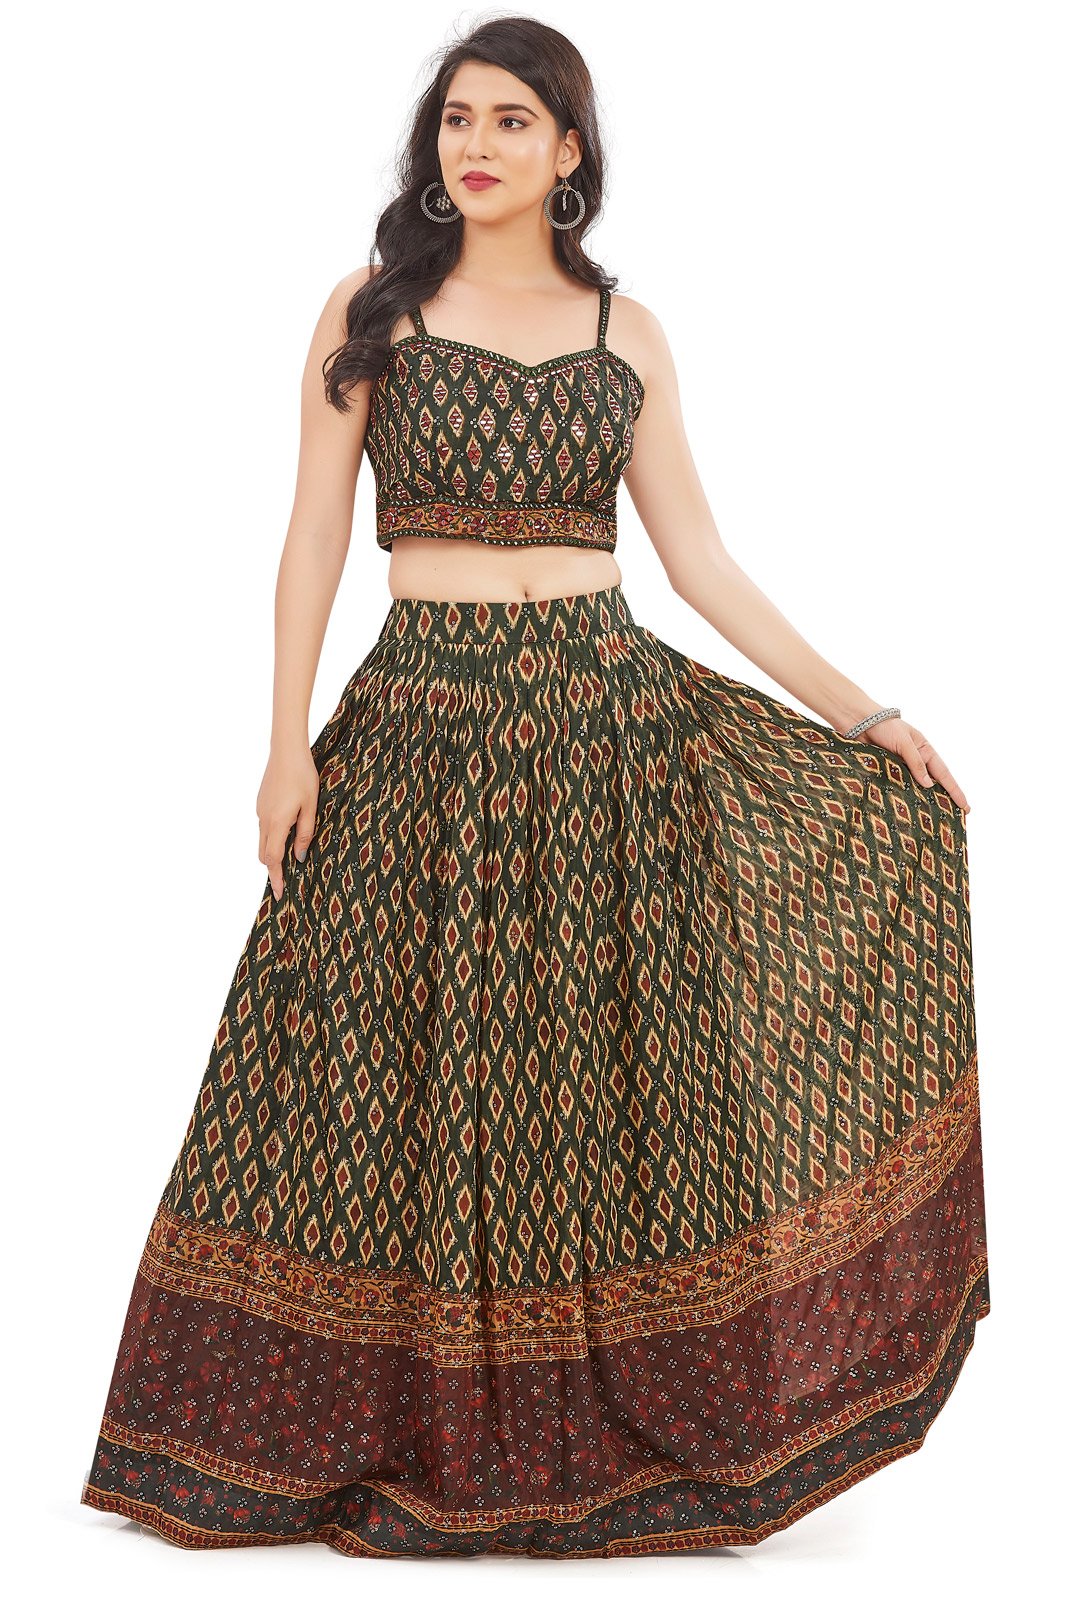 Magnificent Green and Red Mirrorwork Chaniya Choli Set-AariAmi Boutique